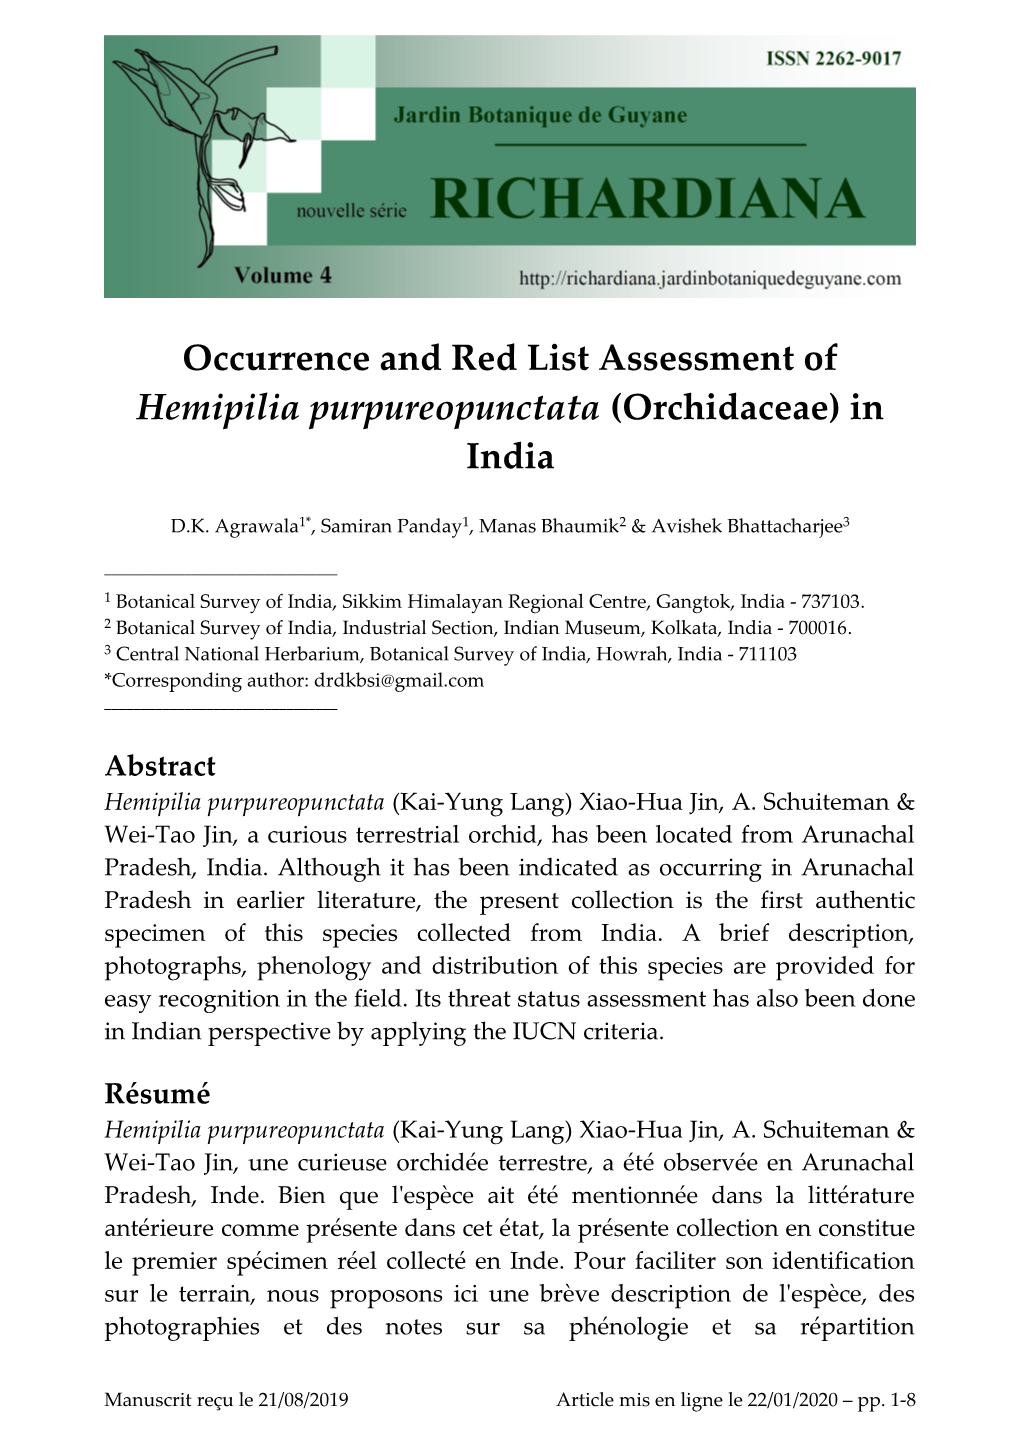 Occurrence and Red List Assessment of Hemipilia Purpureopunctata (Orchidaceae) in India